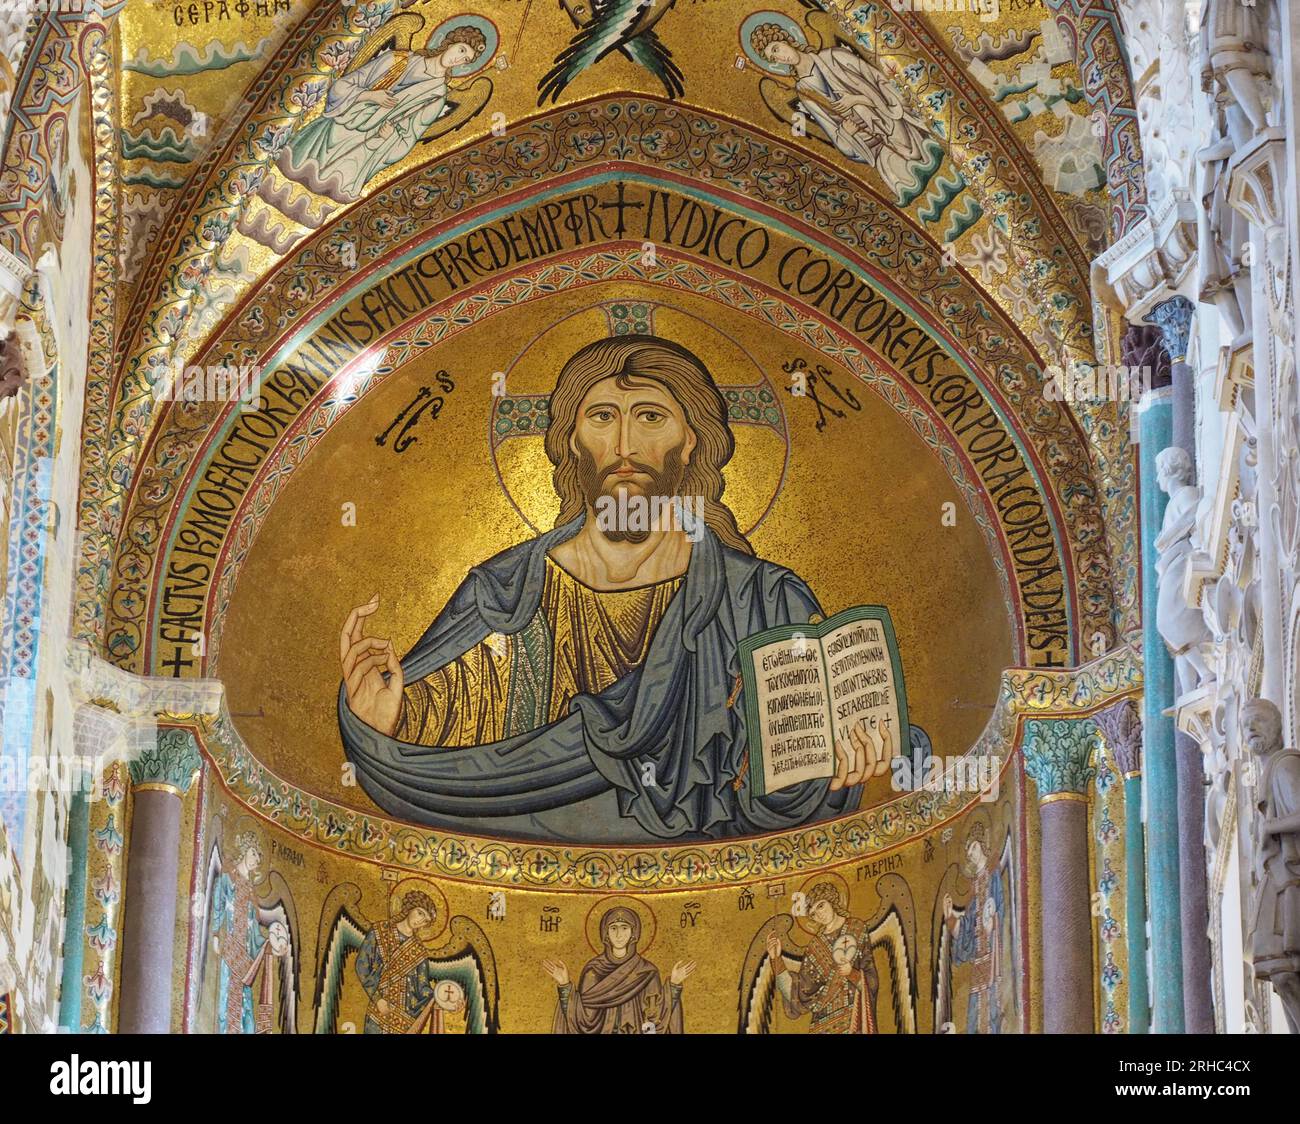 Mosaic in the apse of the cathedral at Cefalu portrays Christ Pantokrator.  The figure carries the Gospel of John in his left hand. Stock Photo